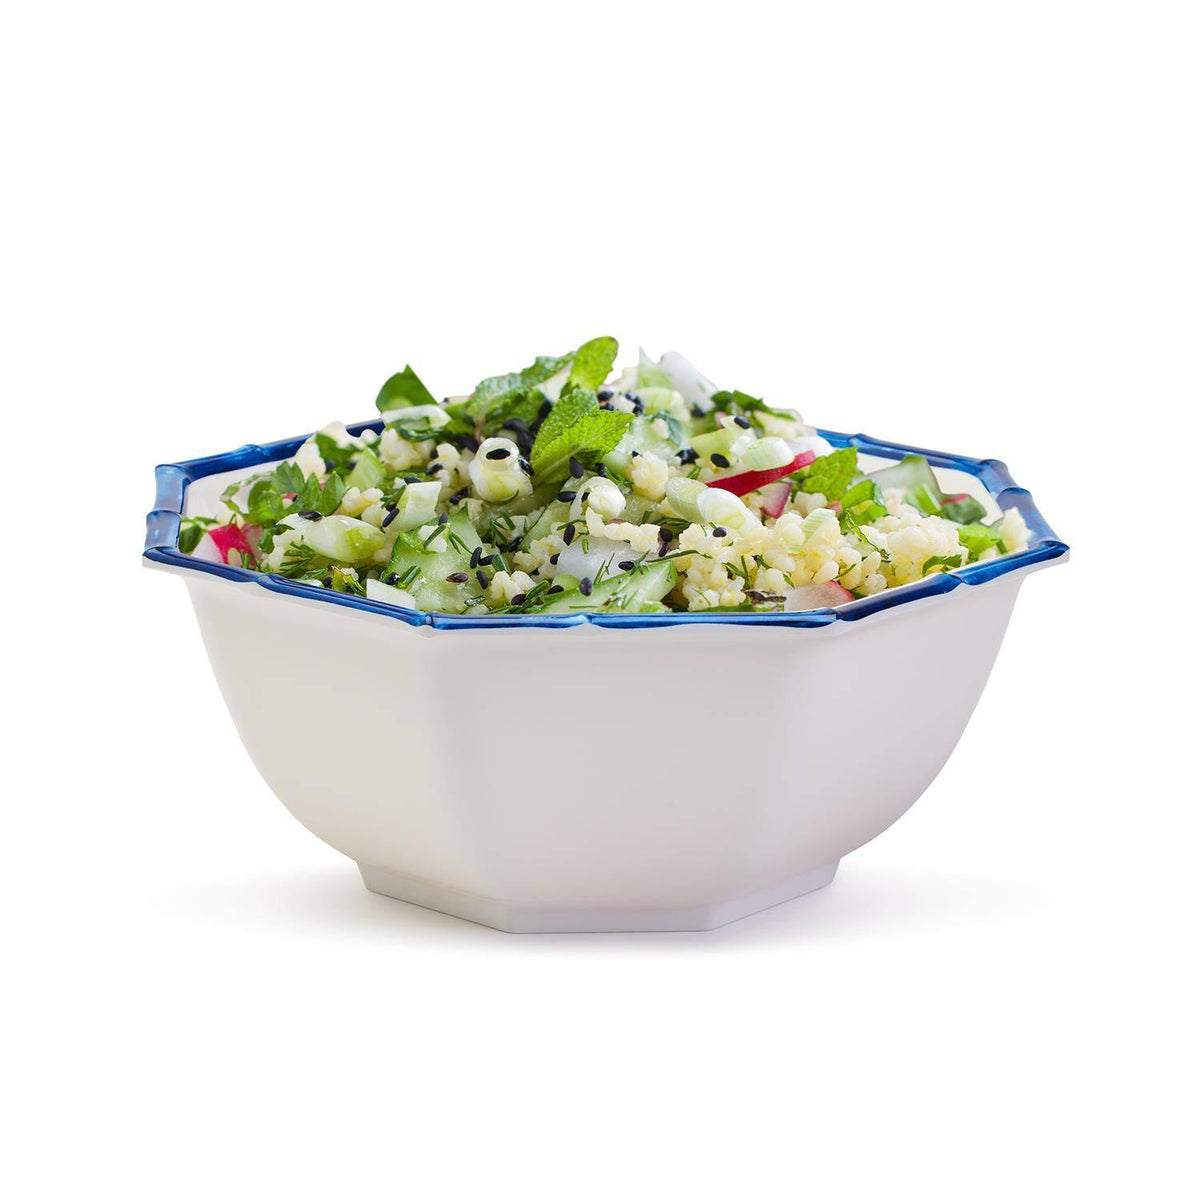 Blue Bamboo Octagonal Serving Bowl - The Preppy Bunny